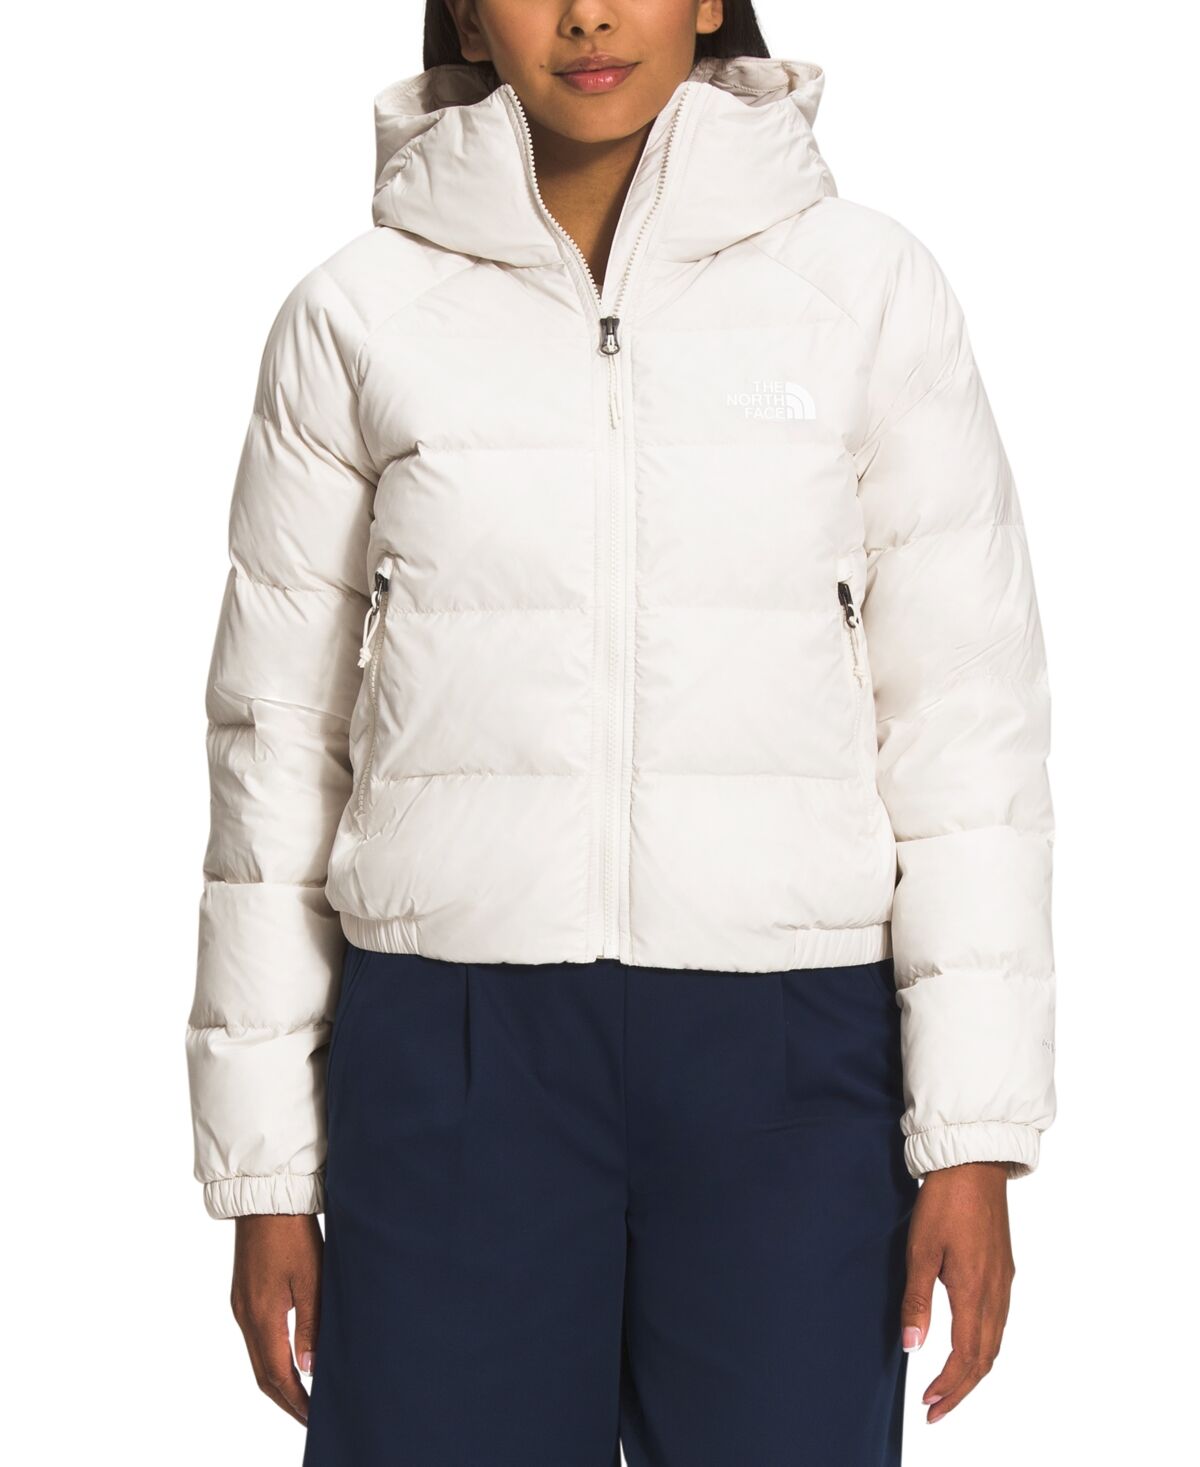 The North Face Women's Hydrenalite Hooded Down Jacket - Gardenia White